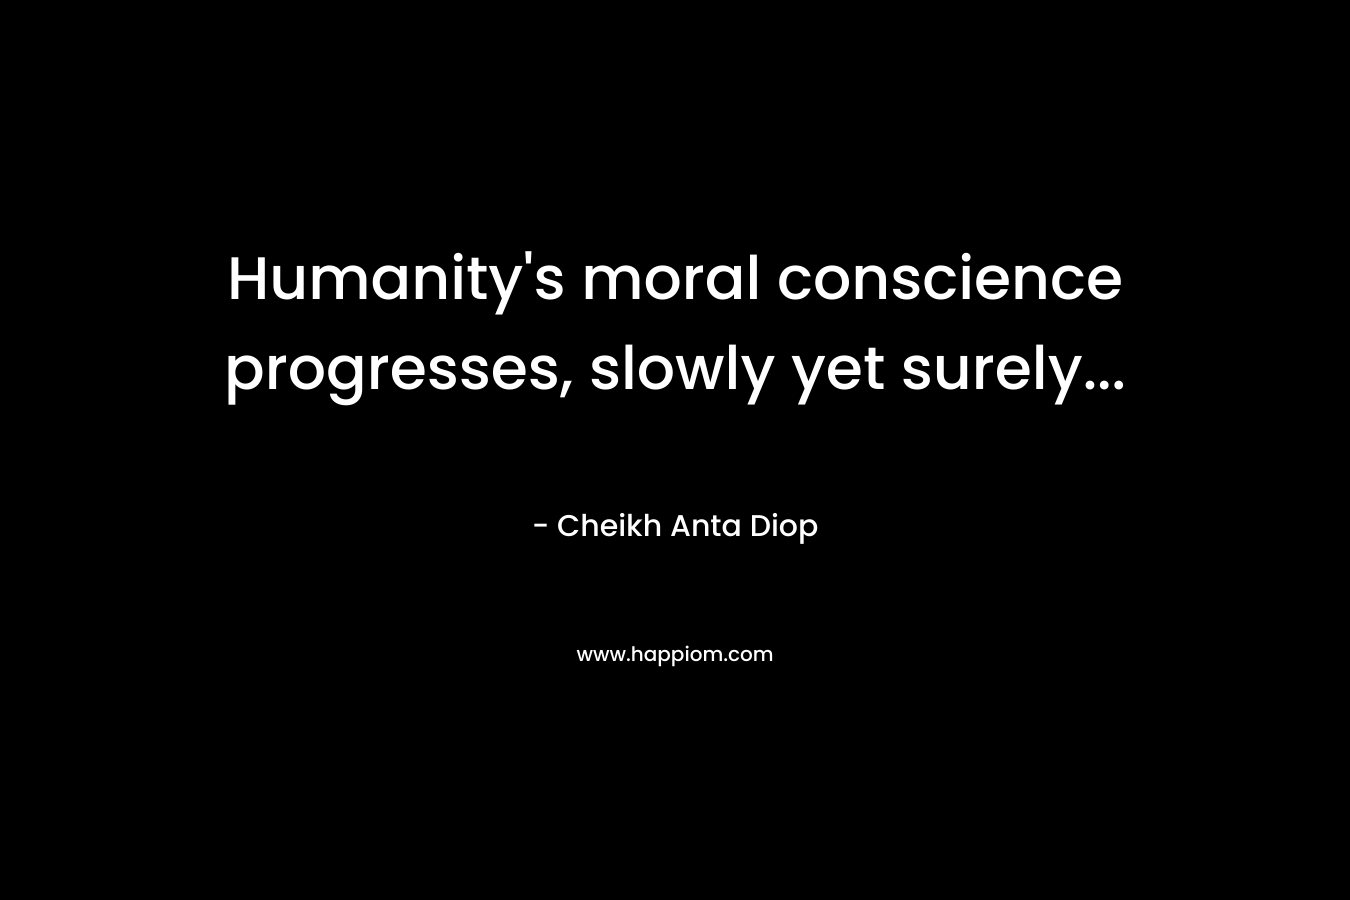 Humanity's moral conscience progresses, slowly yet surely...